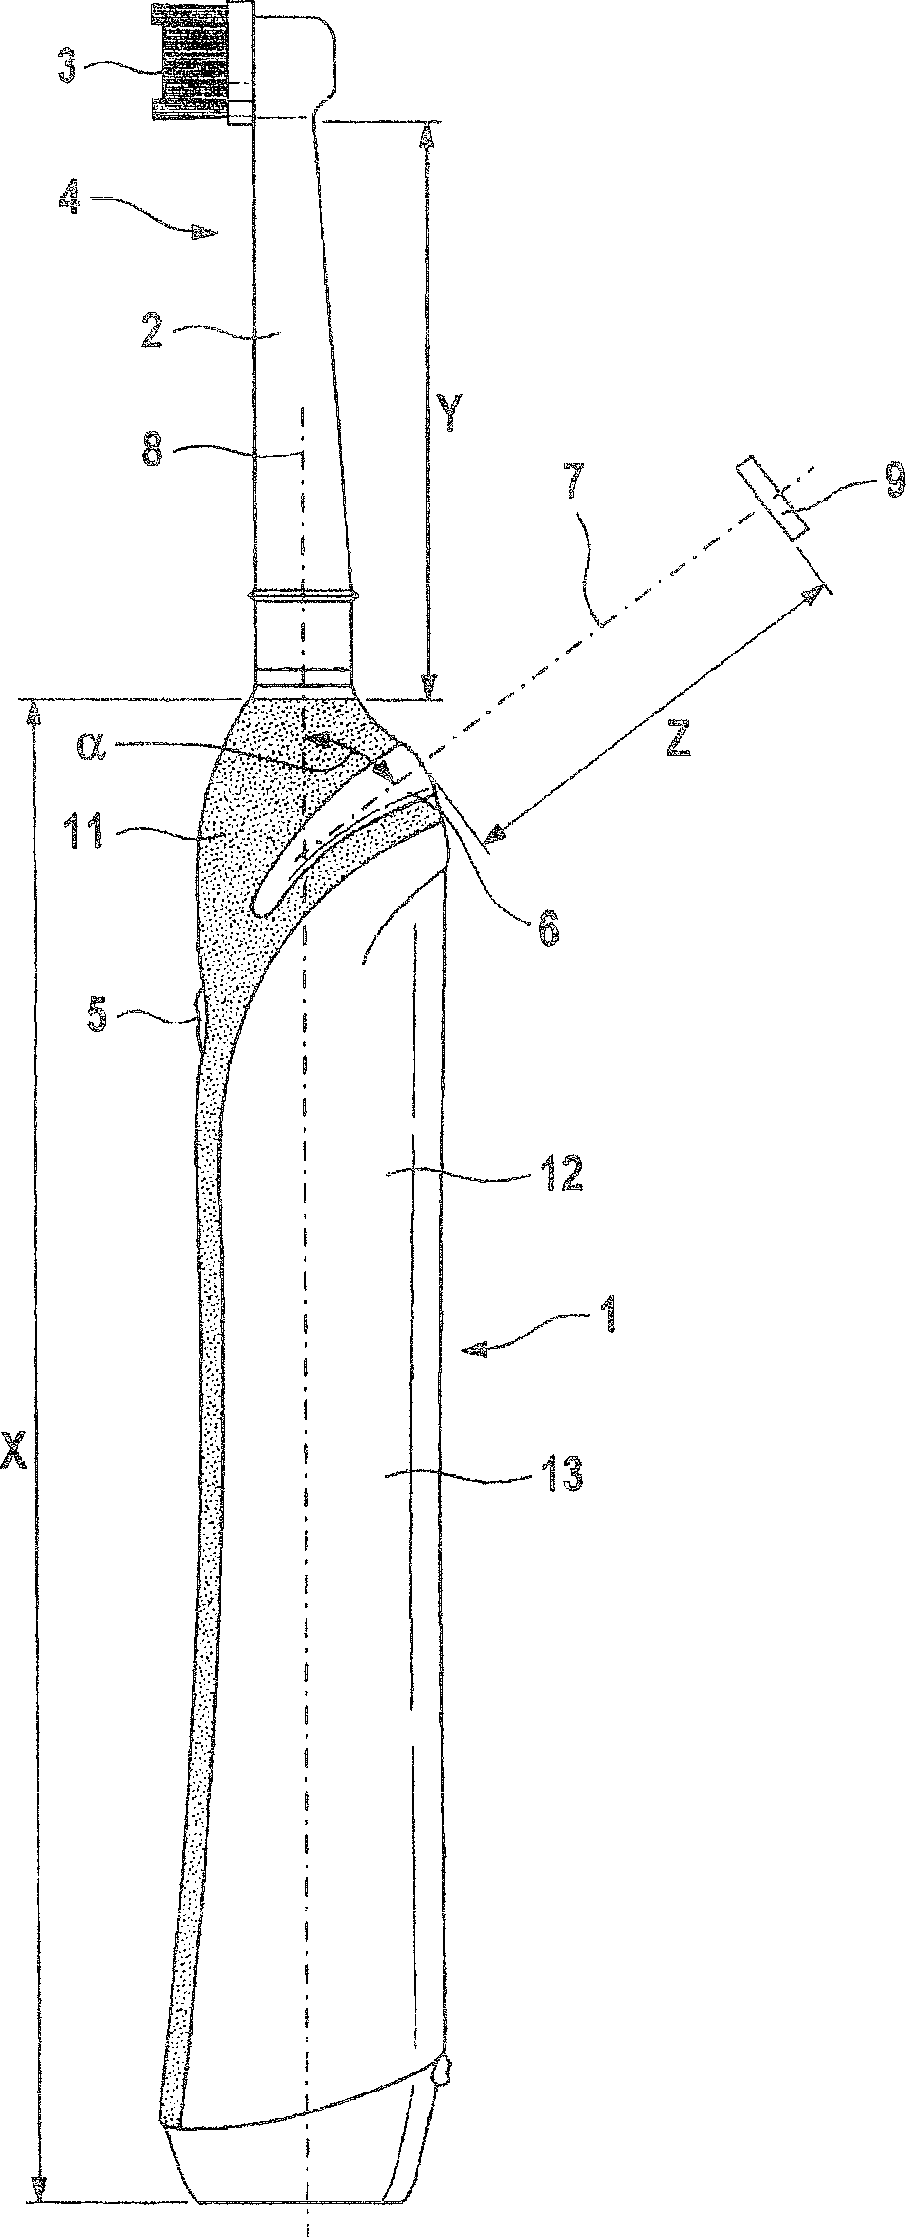 Electric toothbrush and method of manufacturing an electric toothbrush